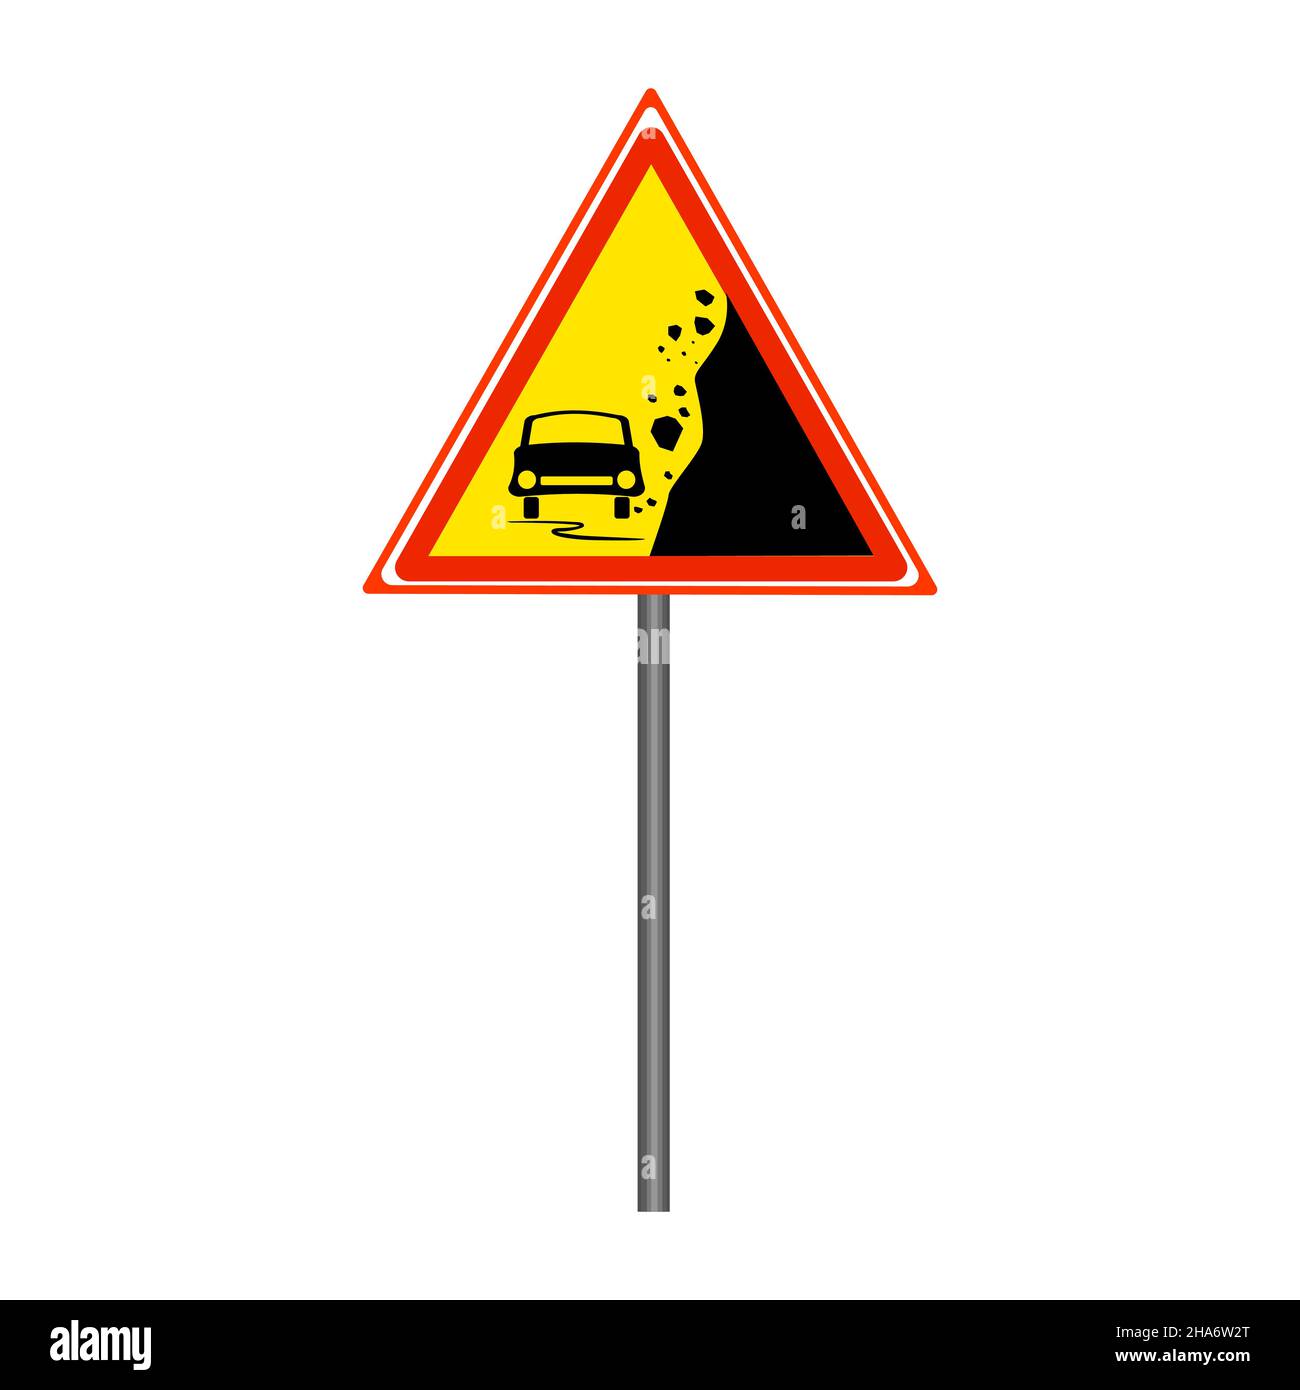 Warning falling rocks sign isolated on white background.Yellow triangle danger sign with car and stones landslide silhouette.Stock vector illustration Stock Vector